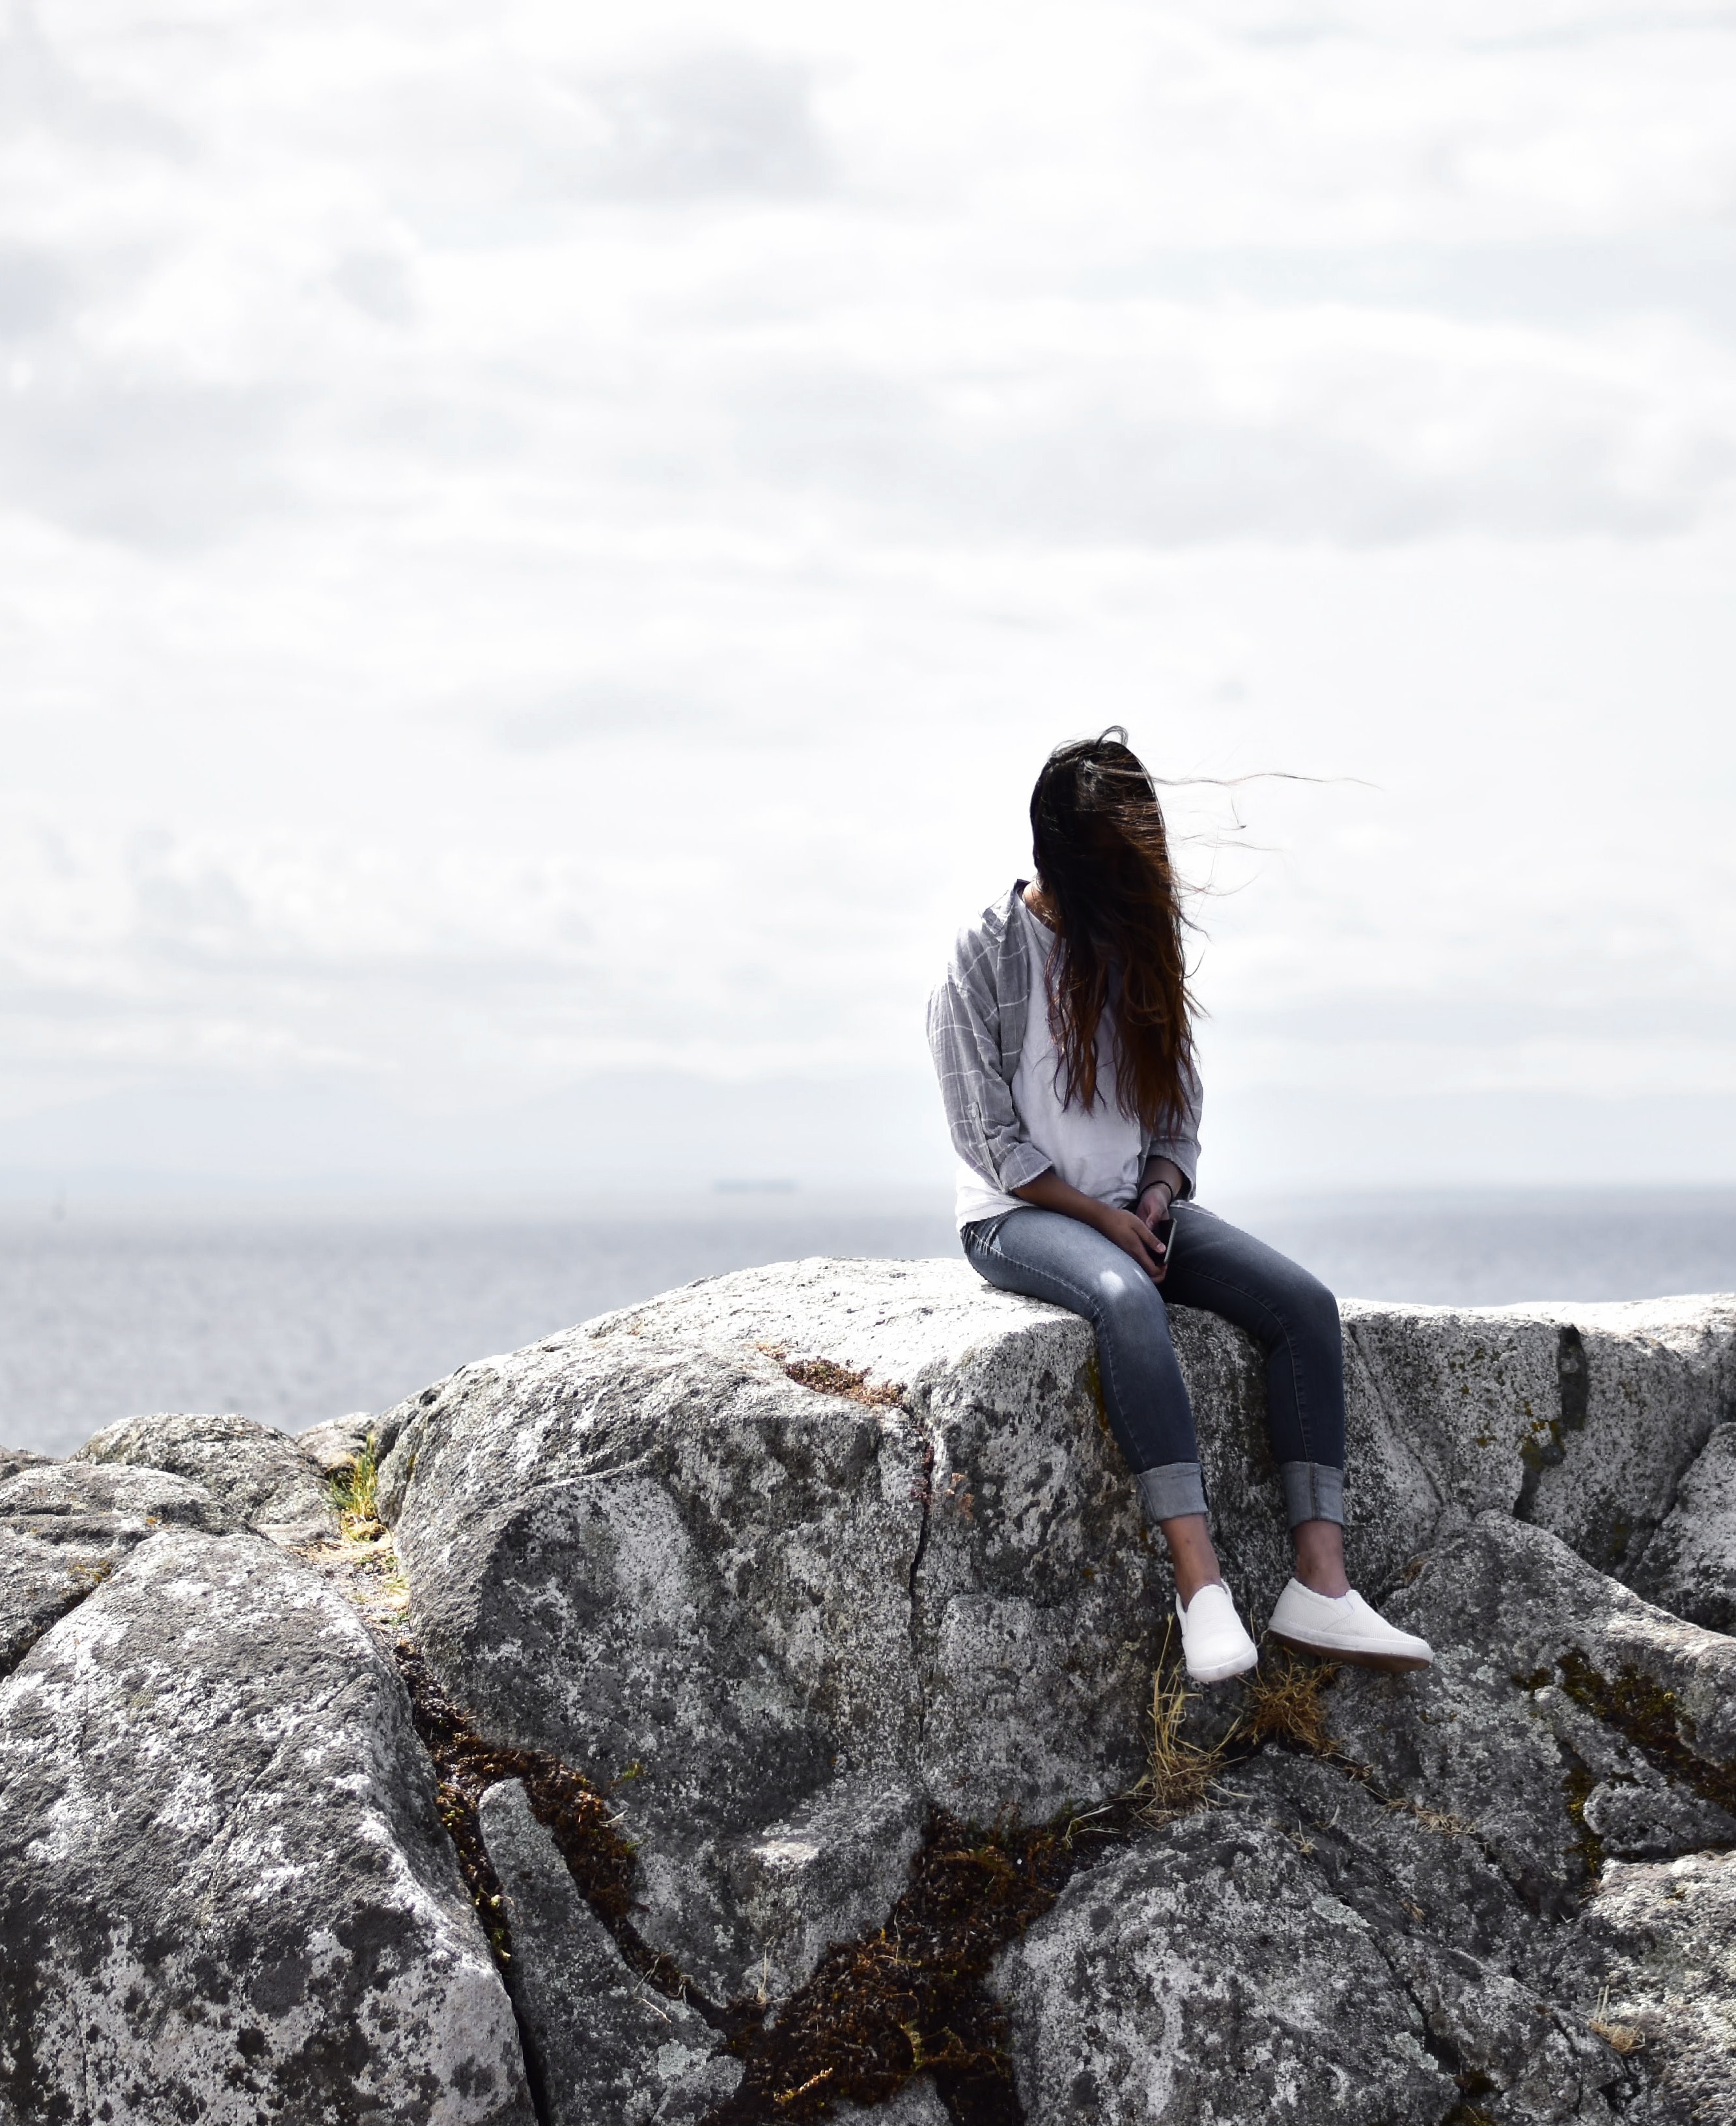 Woman Sits on Gray Rock, Beach, Clouds, Daytime, Landscape, HQ Photo